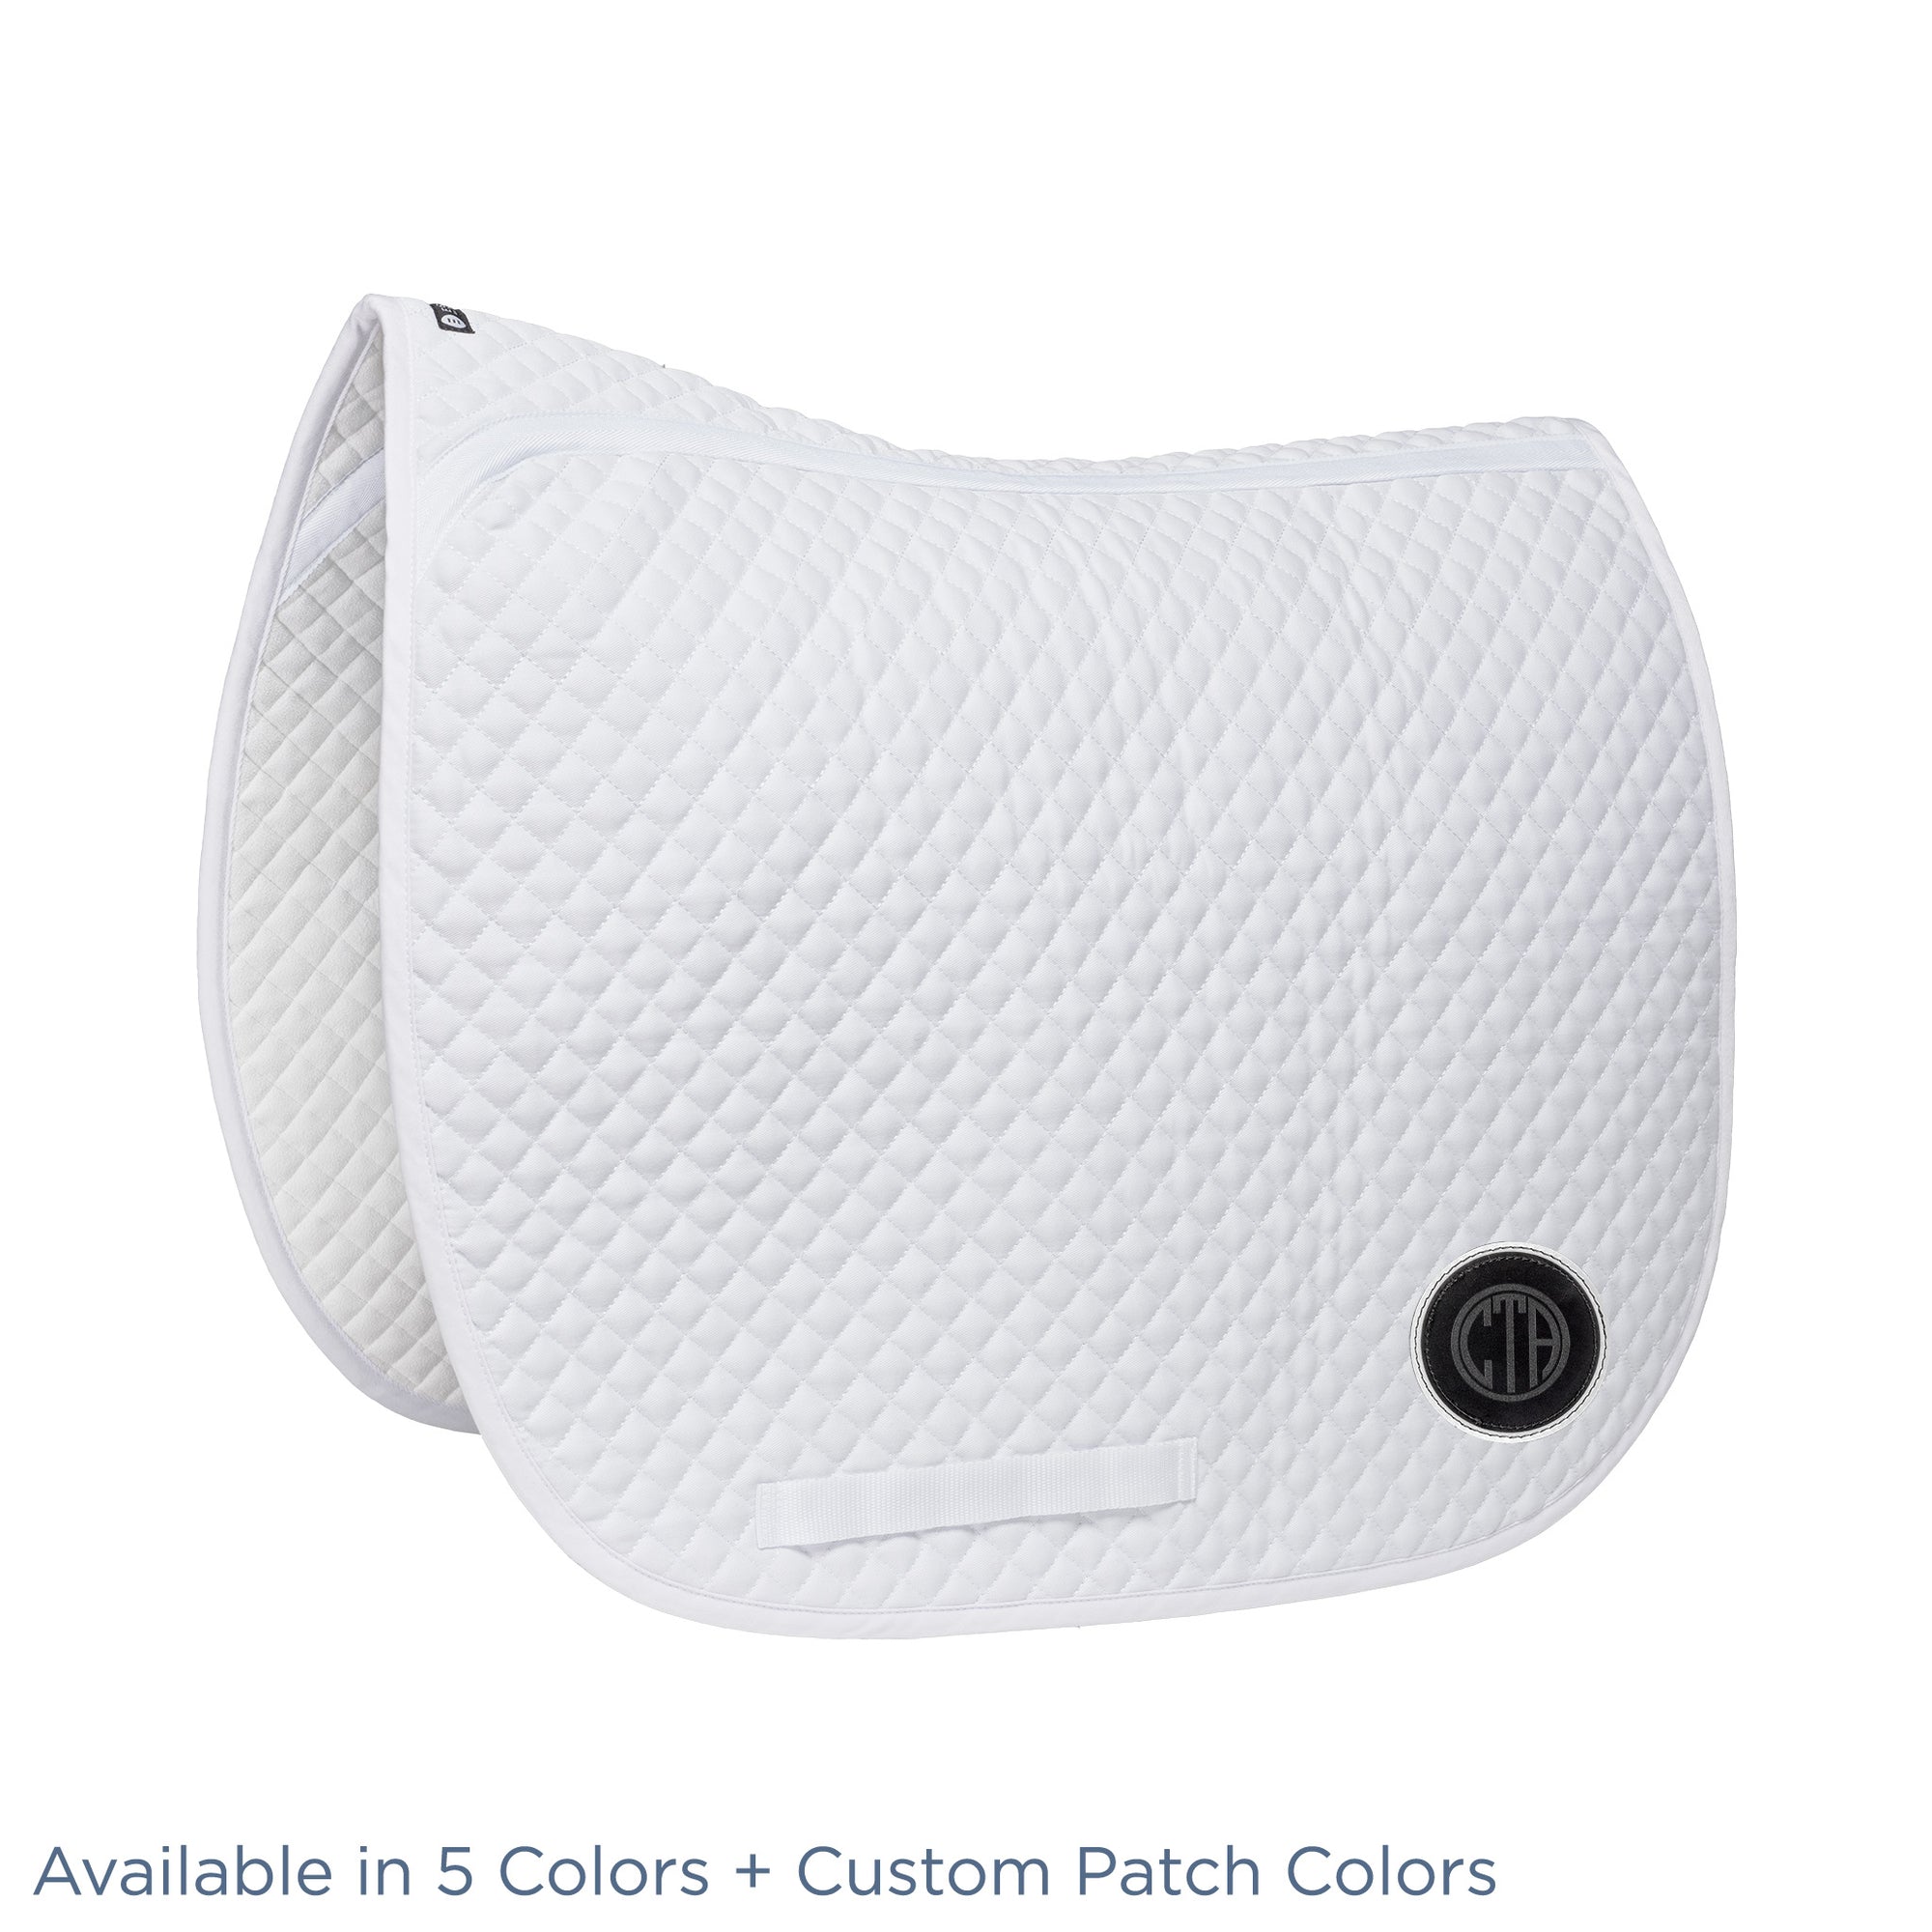 Custom Essential Dressage Square Pad Available in 5 Colors + Custom Patch Colors